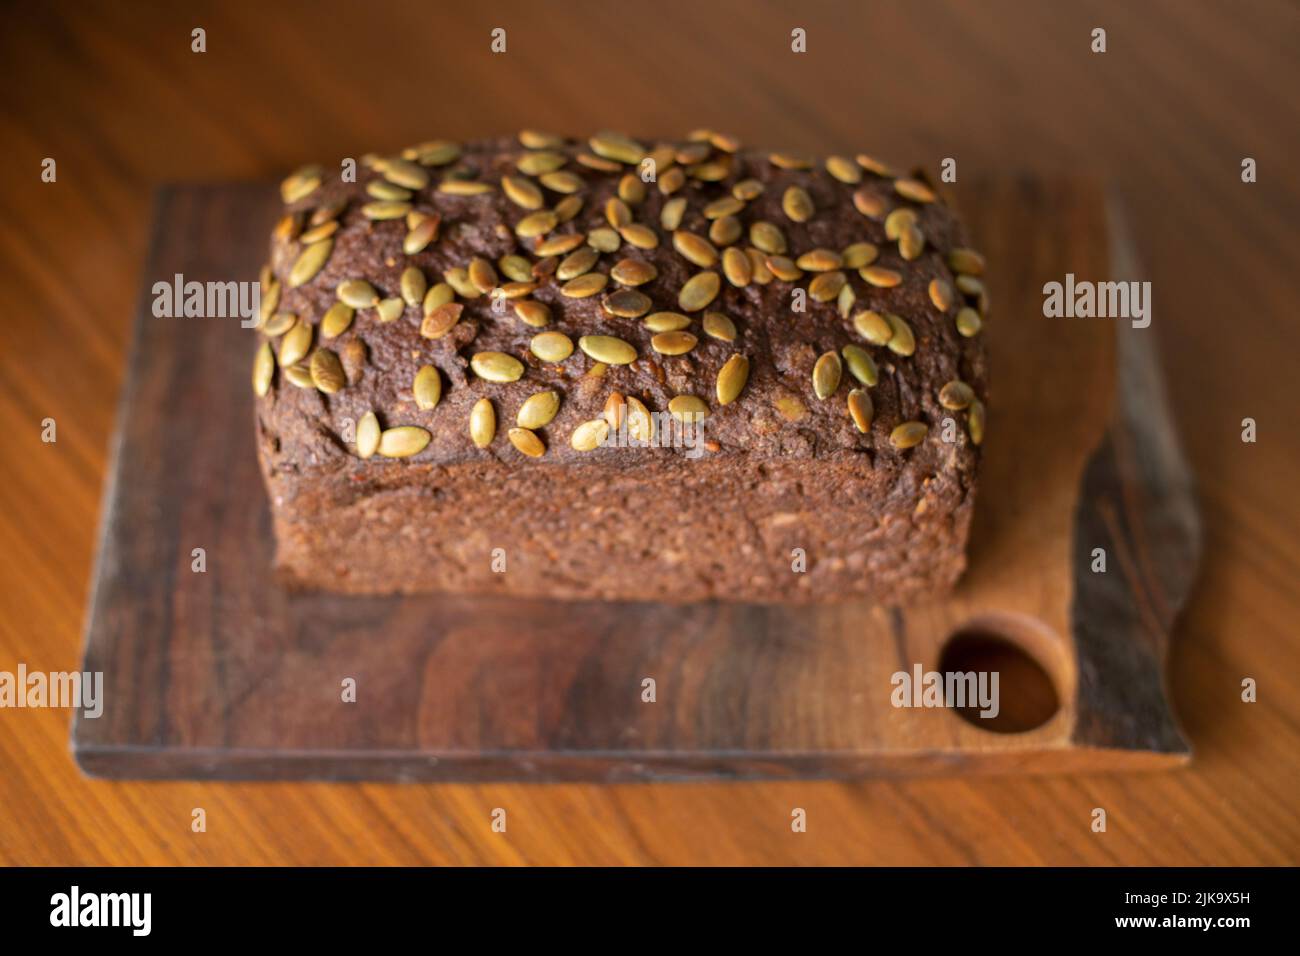 Pumpernickel or mock-rye style gluten-free seeded sourdough bread made from teff and buckwheat flour. Stock Photo